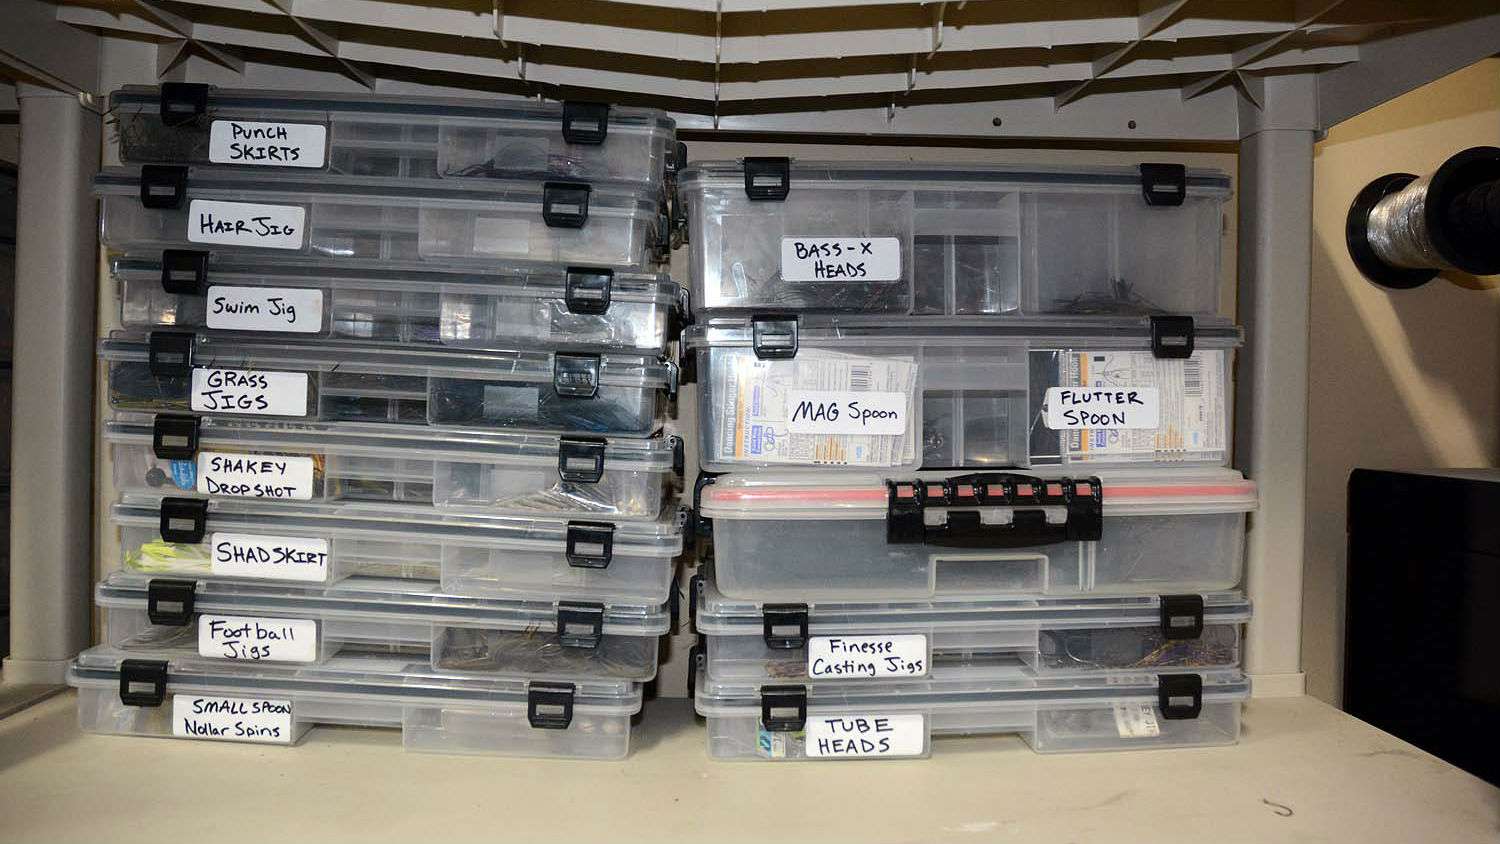 Baits are more specialized on this shelf that is reserved for boxes containing a variety of lures and terminal tackle. Everything from structure spoons to finesse casting jigs is easily found here. 